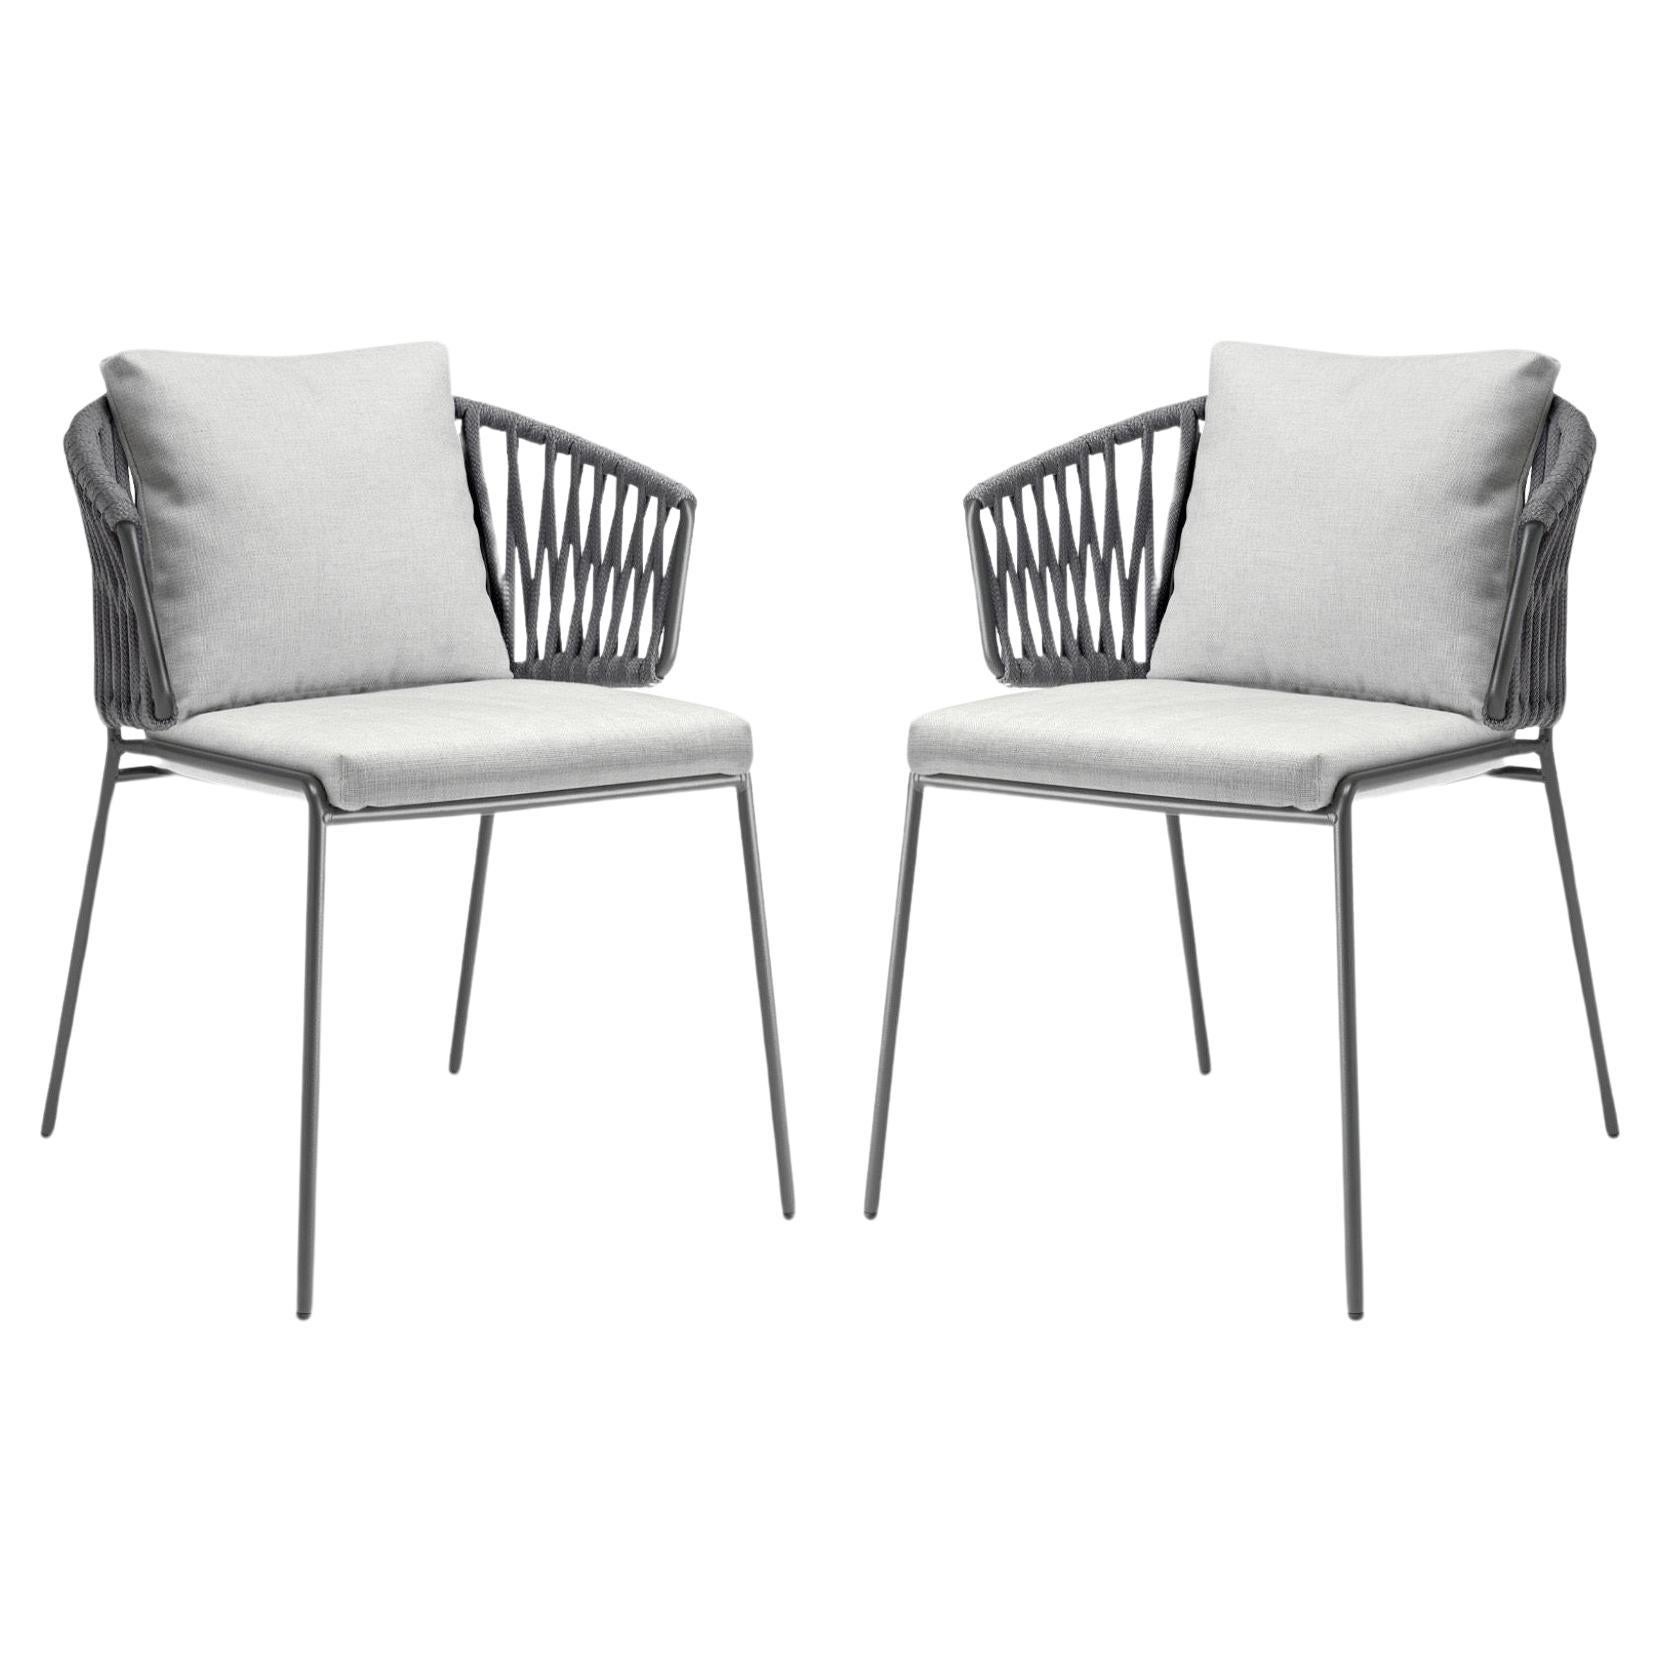 Pair of Grey Outdoor or Indoor Metal and Cord Armchairs, 21 century For Sale